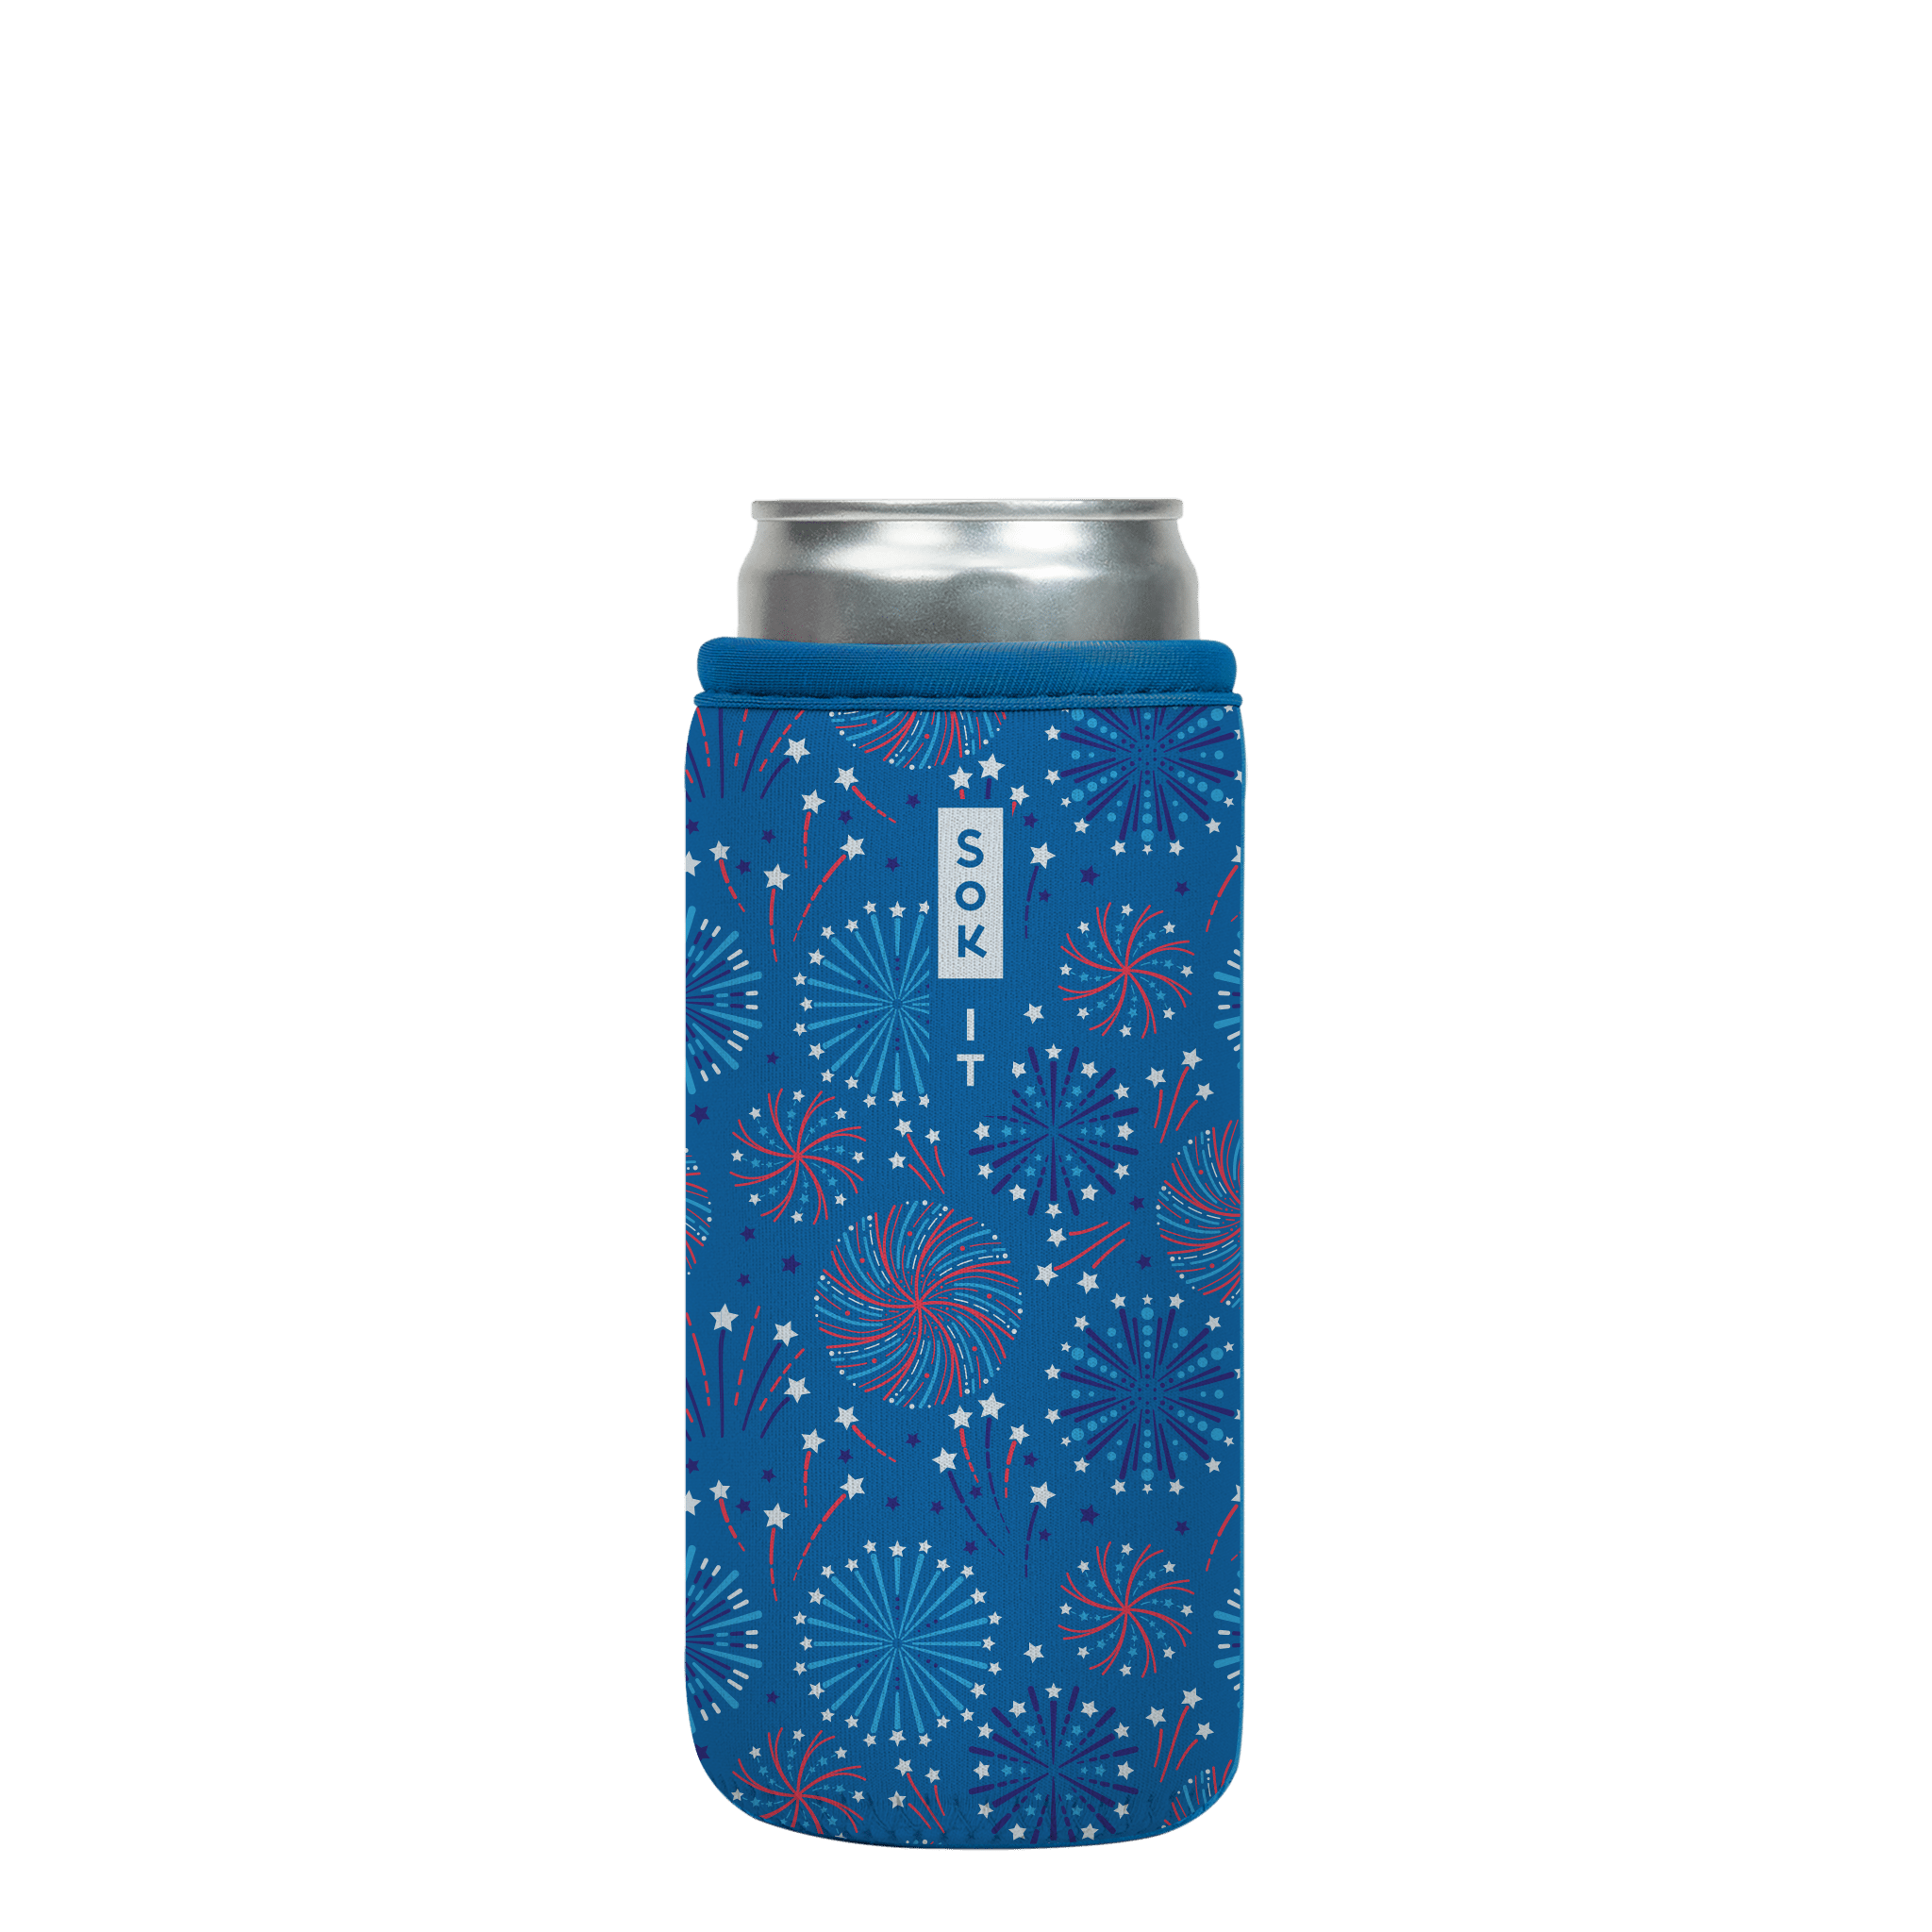 CanSok-July 4th 12oz Slim Can 